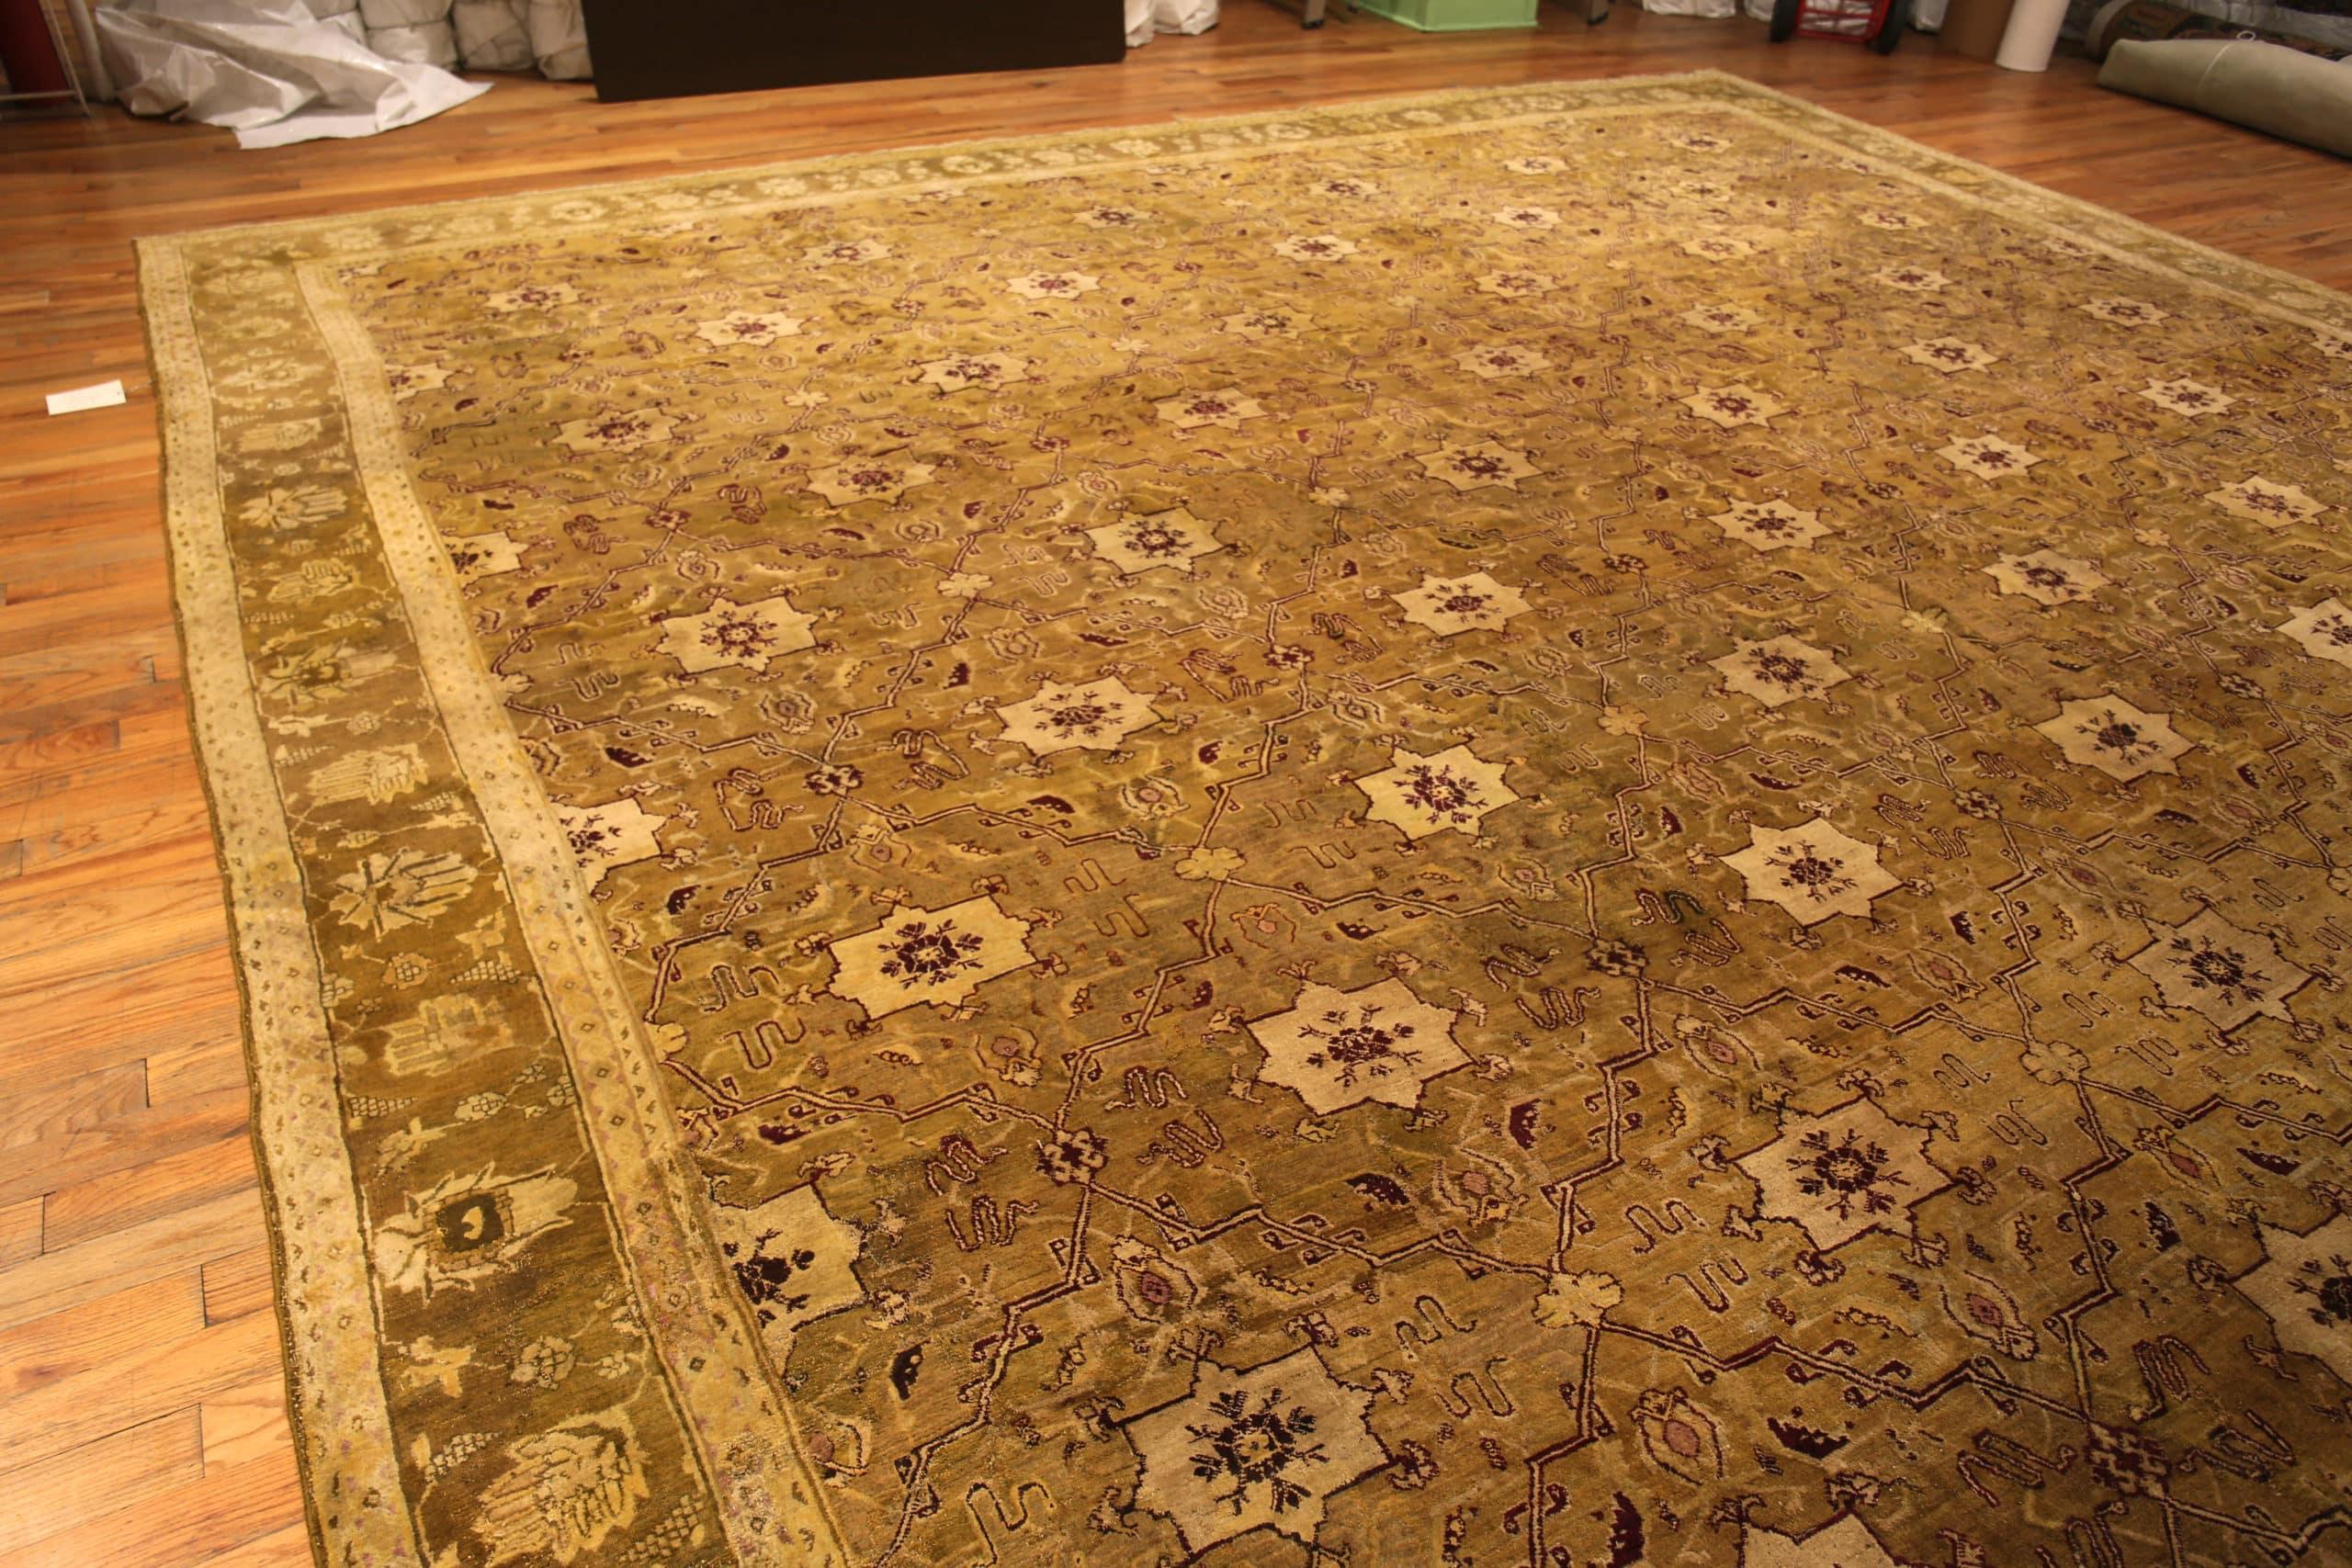 Beautiful Large Antique Indian Agra Rug, Country of Origin: India, Circa Date: 1880 – The gorgeous brown tones of this earthy, Agra rug from the 1880s are an excellent piece to add charm to any space that is large enough to accommodate it. Agra rugs